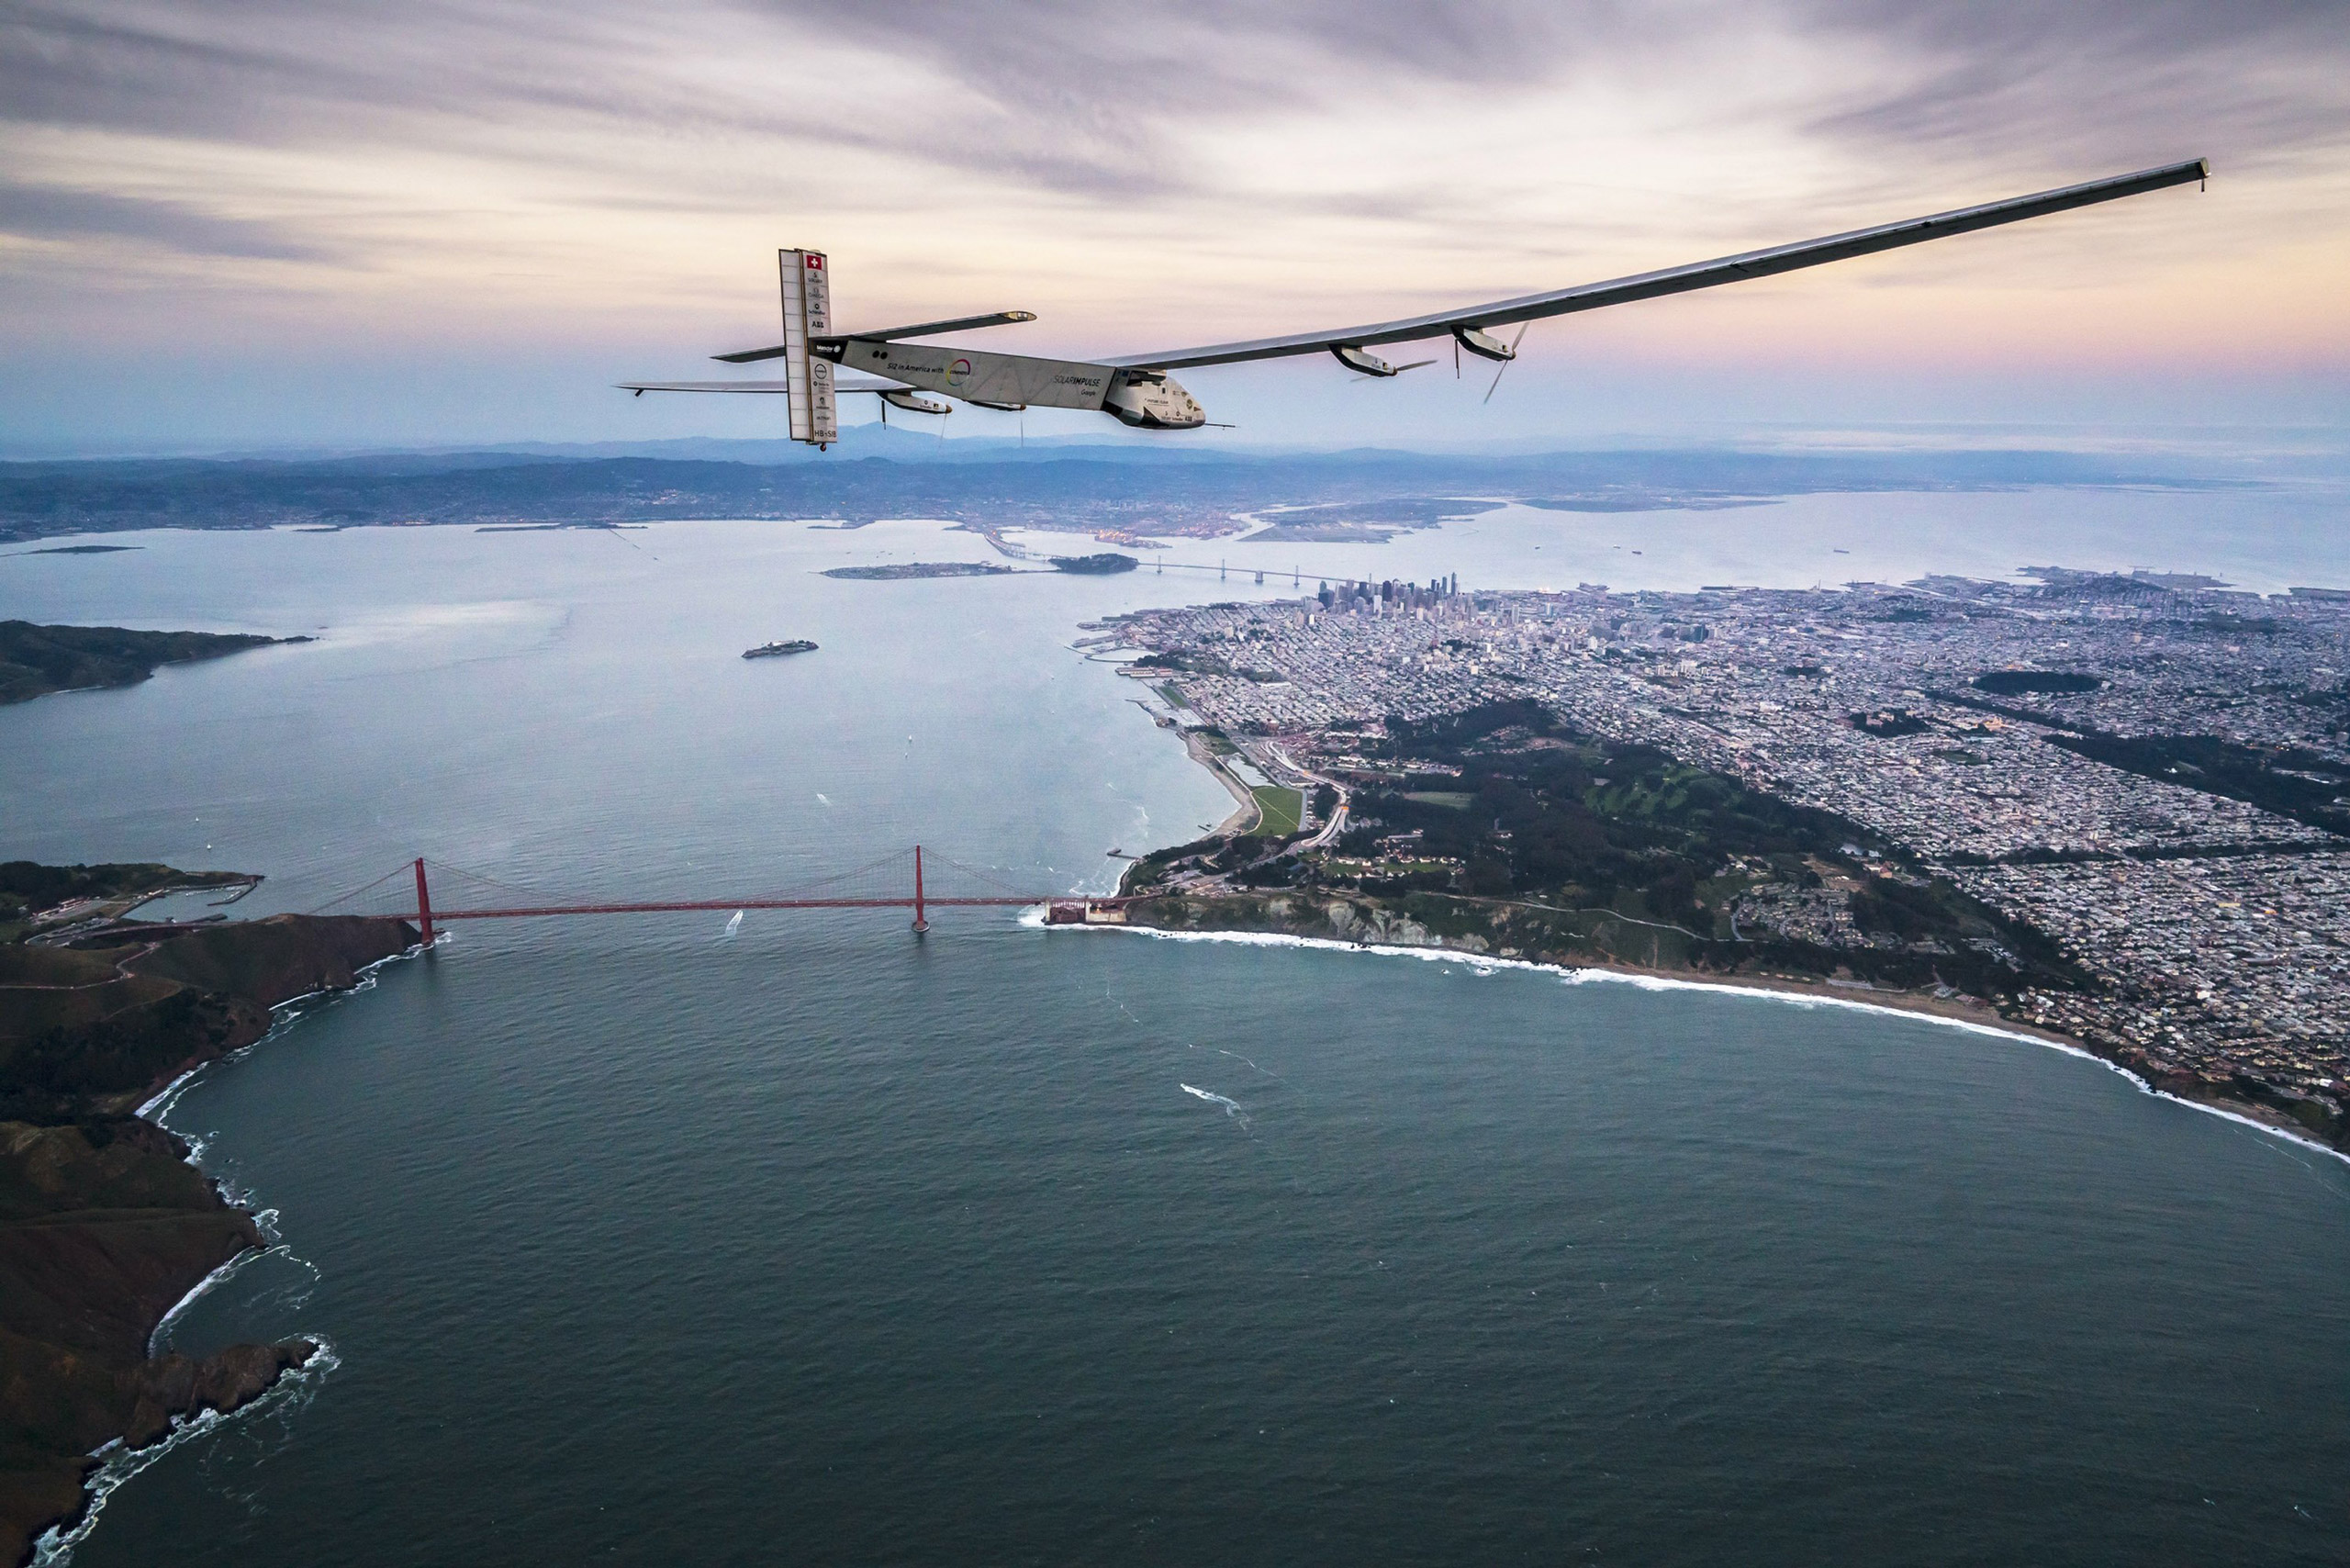 Solar powered plane 'Solar Impulse 2', piloted by Swiss adventurer Bertrand Piccard, flies over the Golden Gate bridge in San Francisco before landing in Mountain View, Calif., on April 23, 2016. (Jean Revillard—Getty Images)